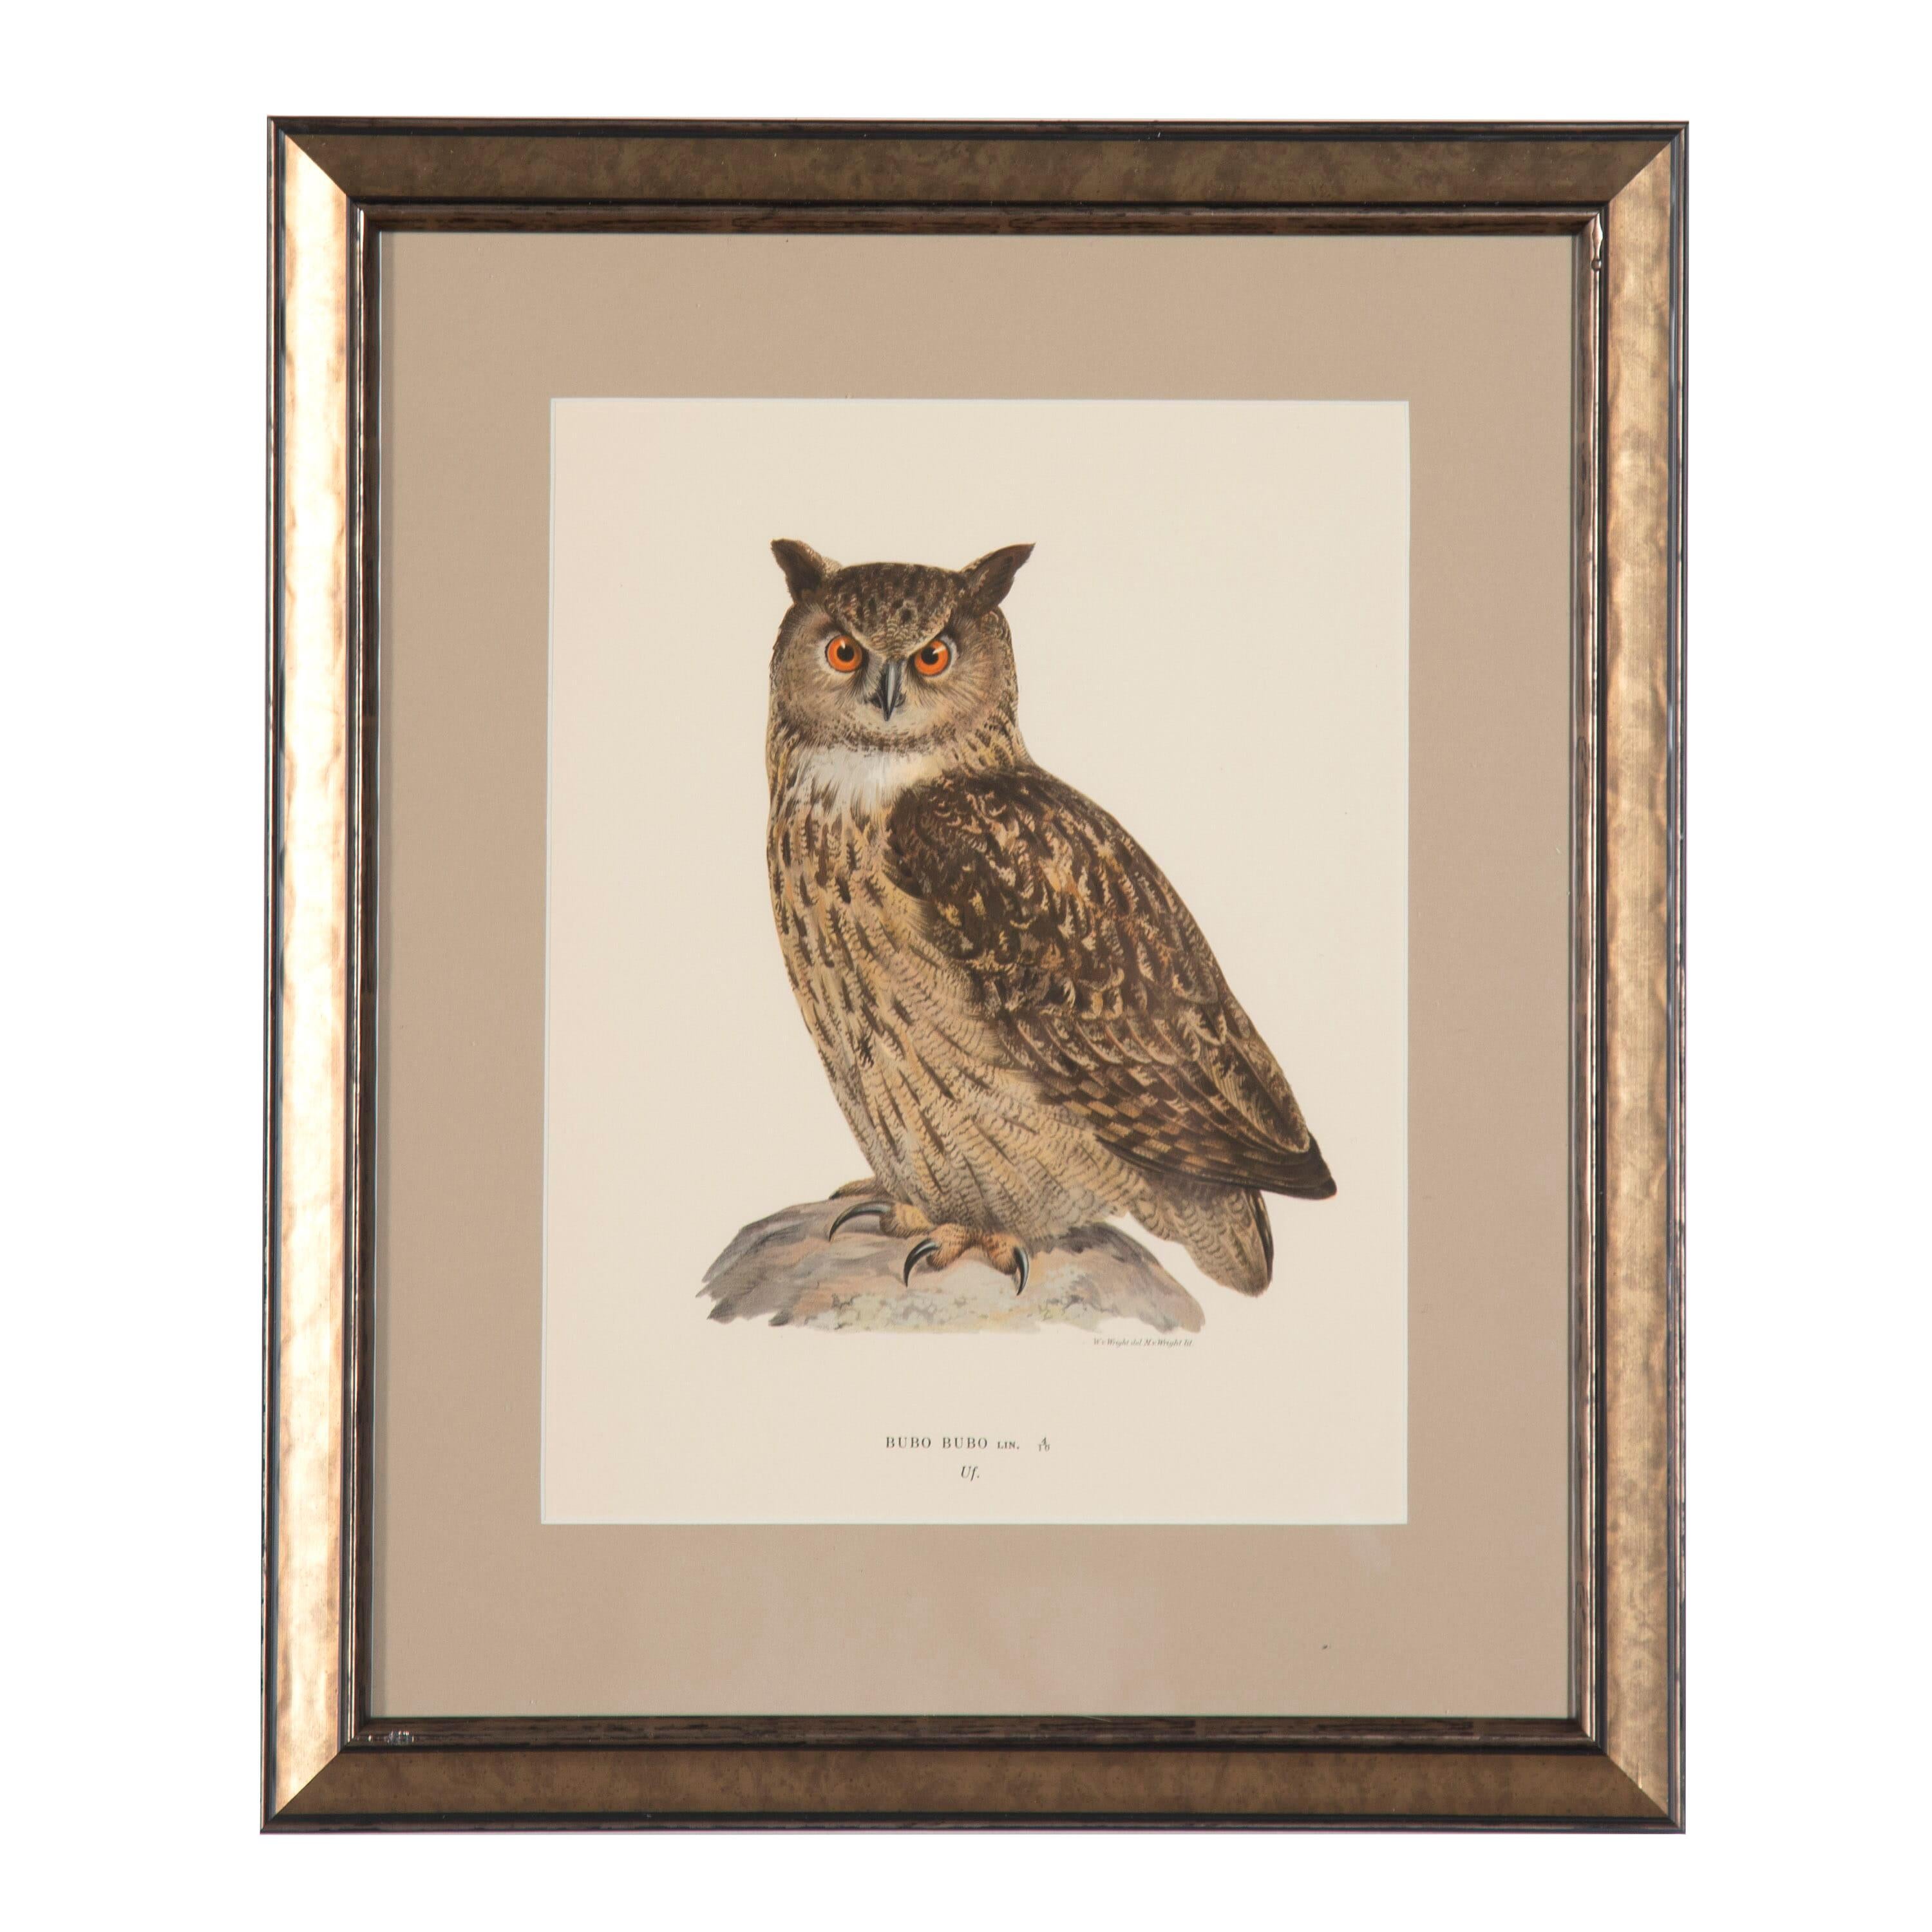 Collection of Swedish owl engravings by the Finnish artist, Magnus Von Wright who was a well-known artist and ornithologist.

These engravings capture details and colours not previously seen in their time. These colourful chromolithographs were